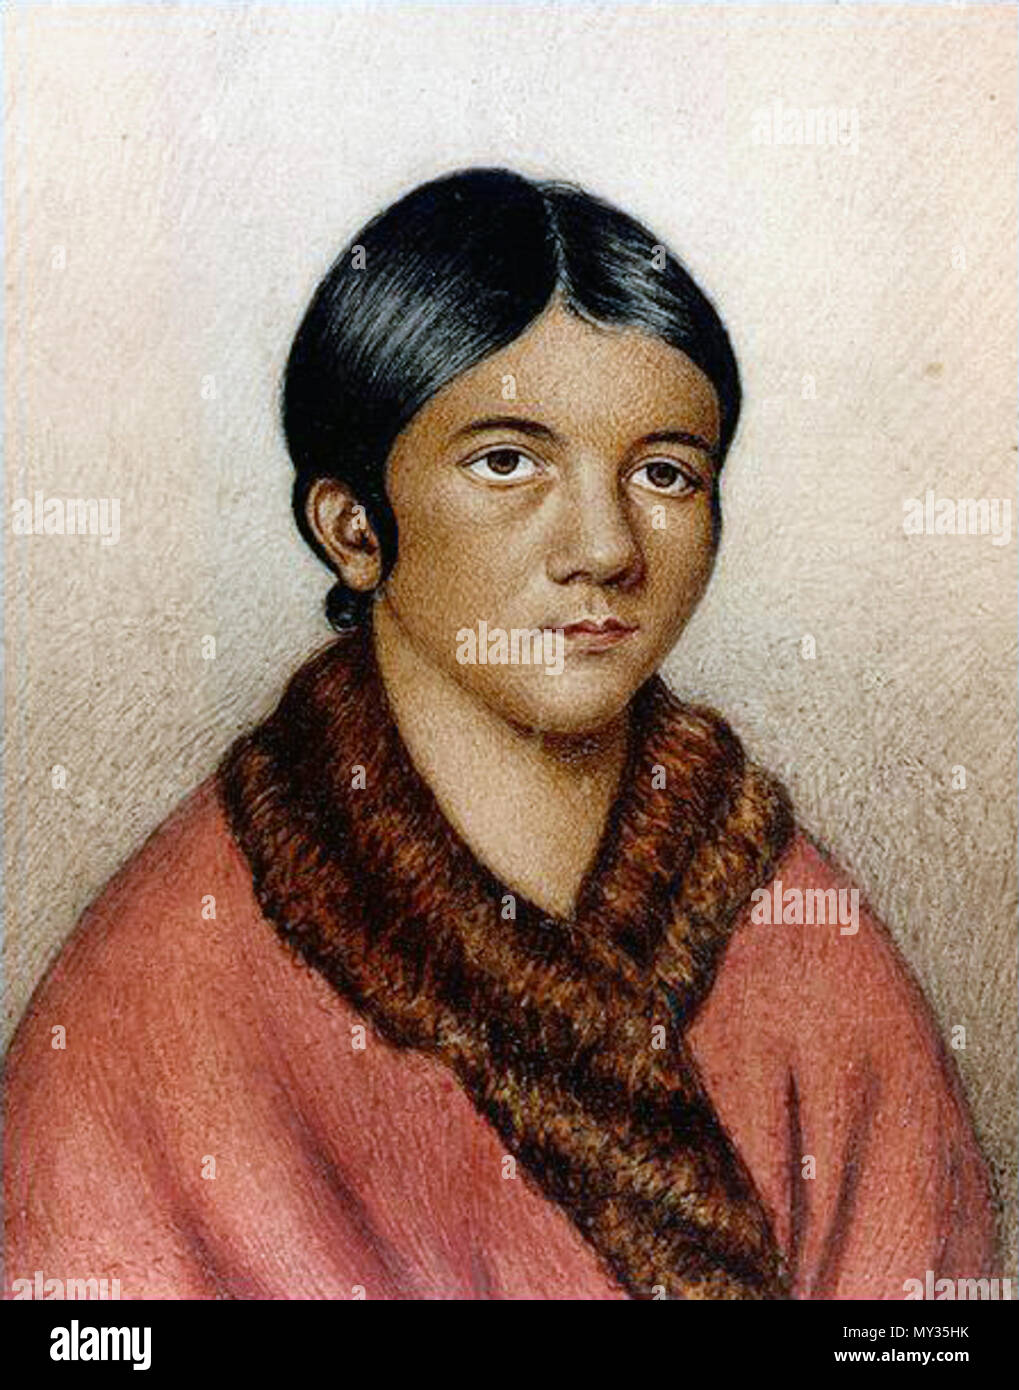 . English: A miniature portrait titled 'A female Red Indian of Newfoundland' which some sources date to 1841. It is believed to be a portrait of Shanawdithit, a Beothuk woman. Most likely a painted copy of Portrait of Demasduit (Mary March), by Lady Henrietta Hamilton (1819, see File:Demasduit.jpg). Although sometimes attributed to William Gosse, the painter was more likely naturalist Philip Henry Gosse (see also Mullen, Gary R., 'Philip Henry Gosse,' Encyclopedia of Alabama, 26 August 2008, retrieved 9 September 2011) . circa 1841. William Gosse more likely Philip Henry Gosse 484 Shanawdithit Stock Photo